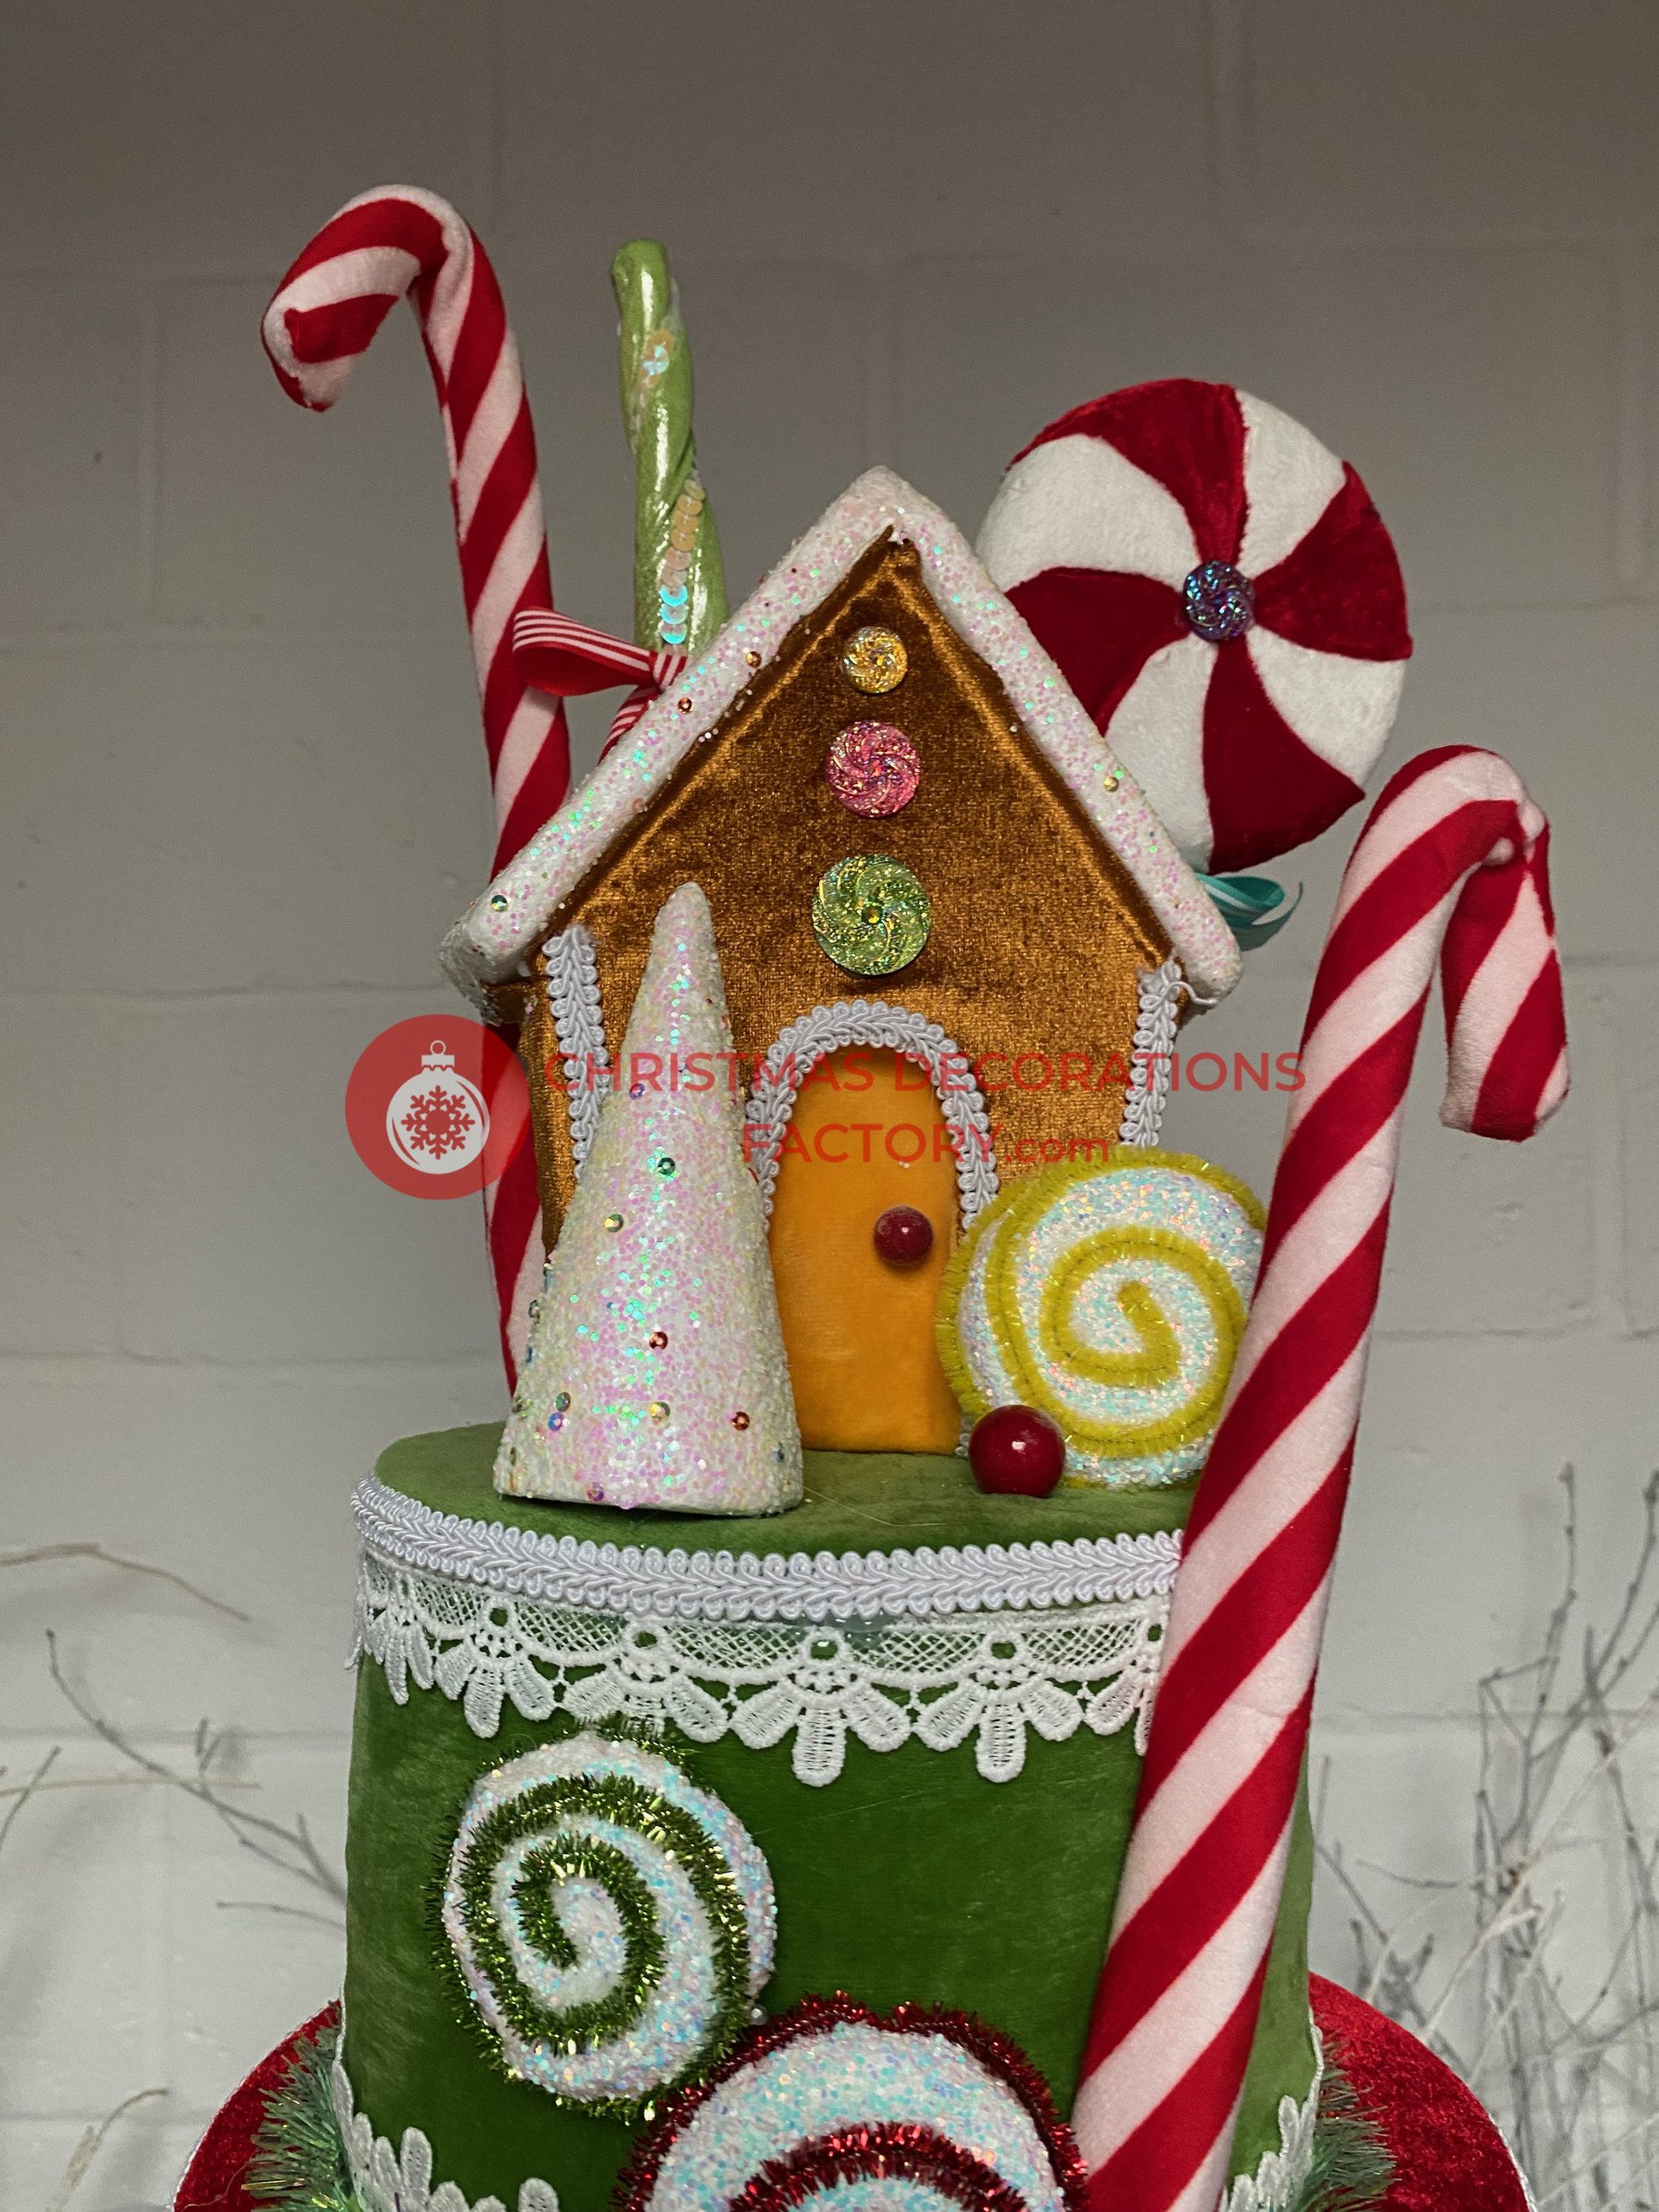 58cm Gingerbread House Tower